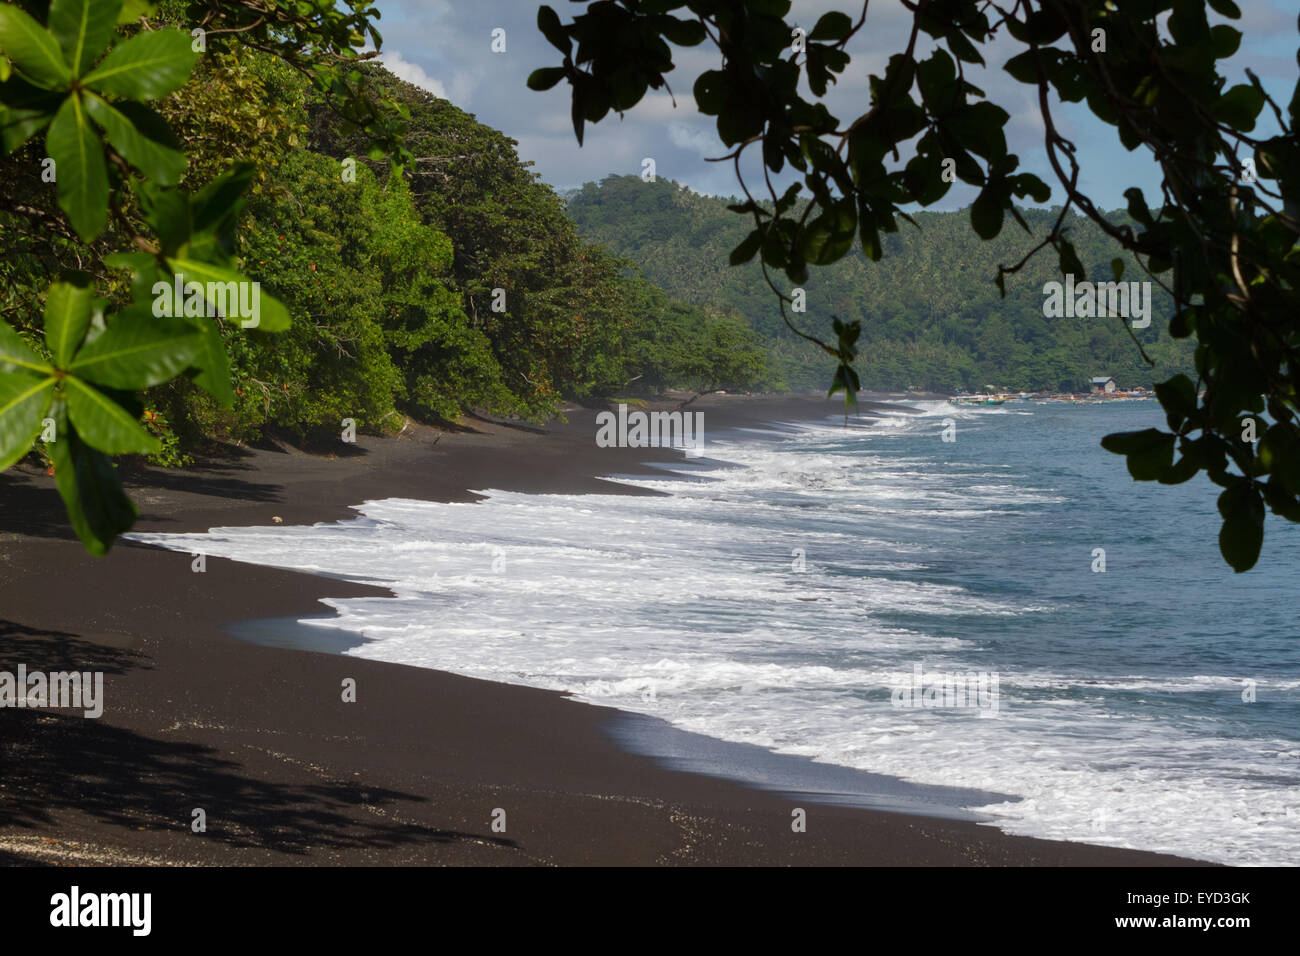 Tropical lowland forest and beach with black volcanic sands, in Tangkoko Nature Reserve, North Sulawesi, Indonesia. Stock Photo